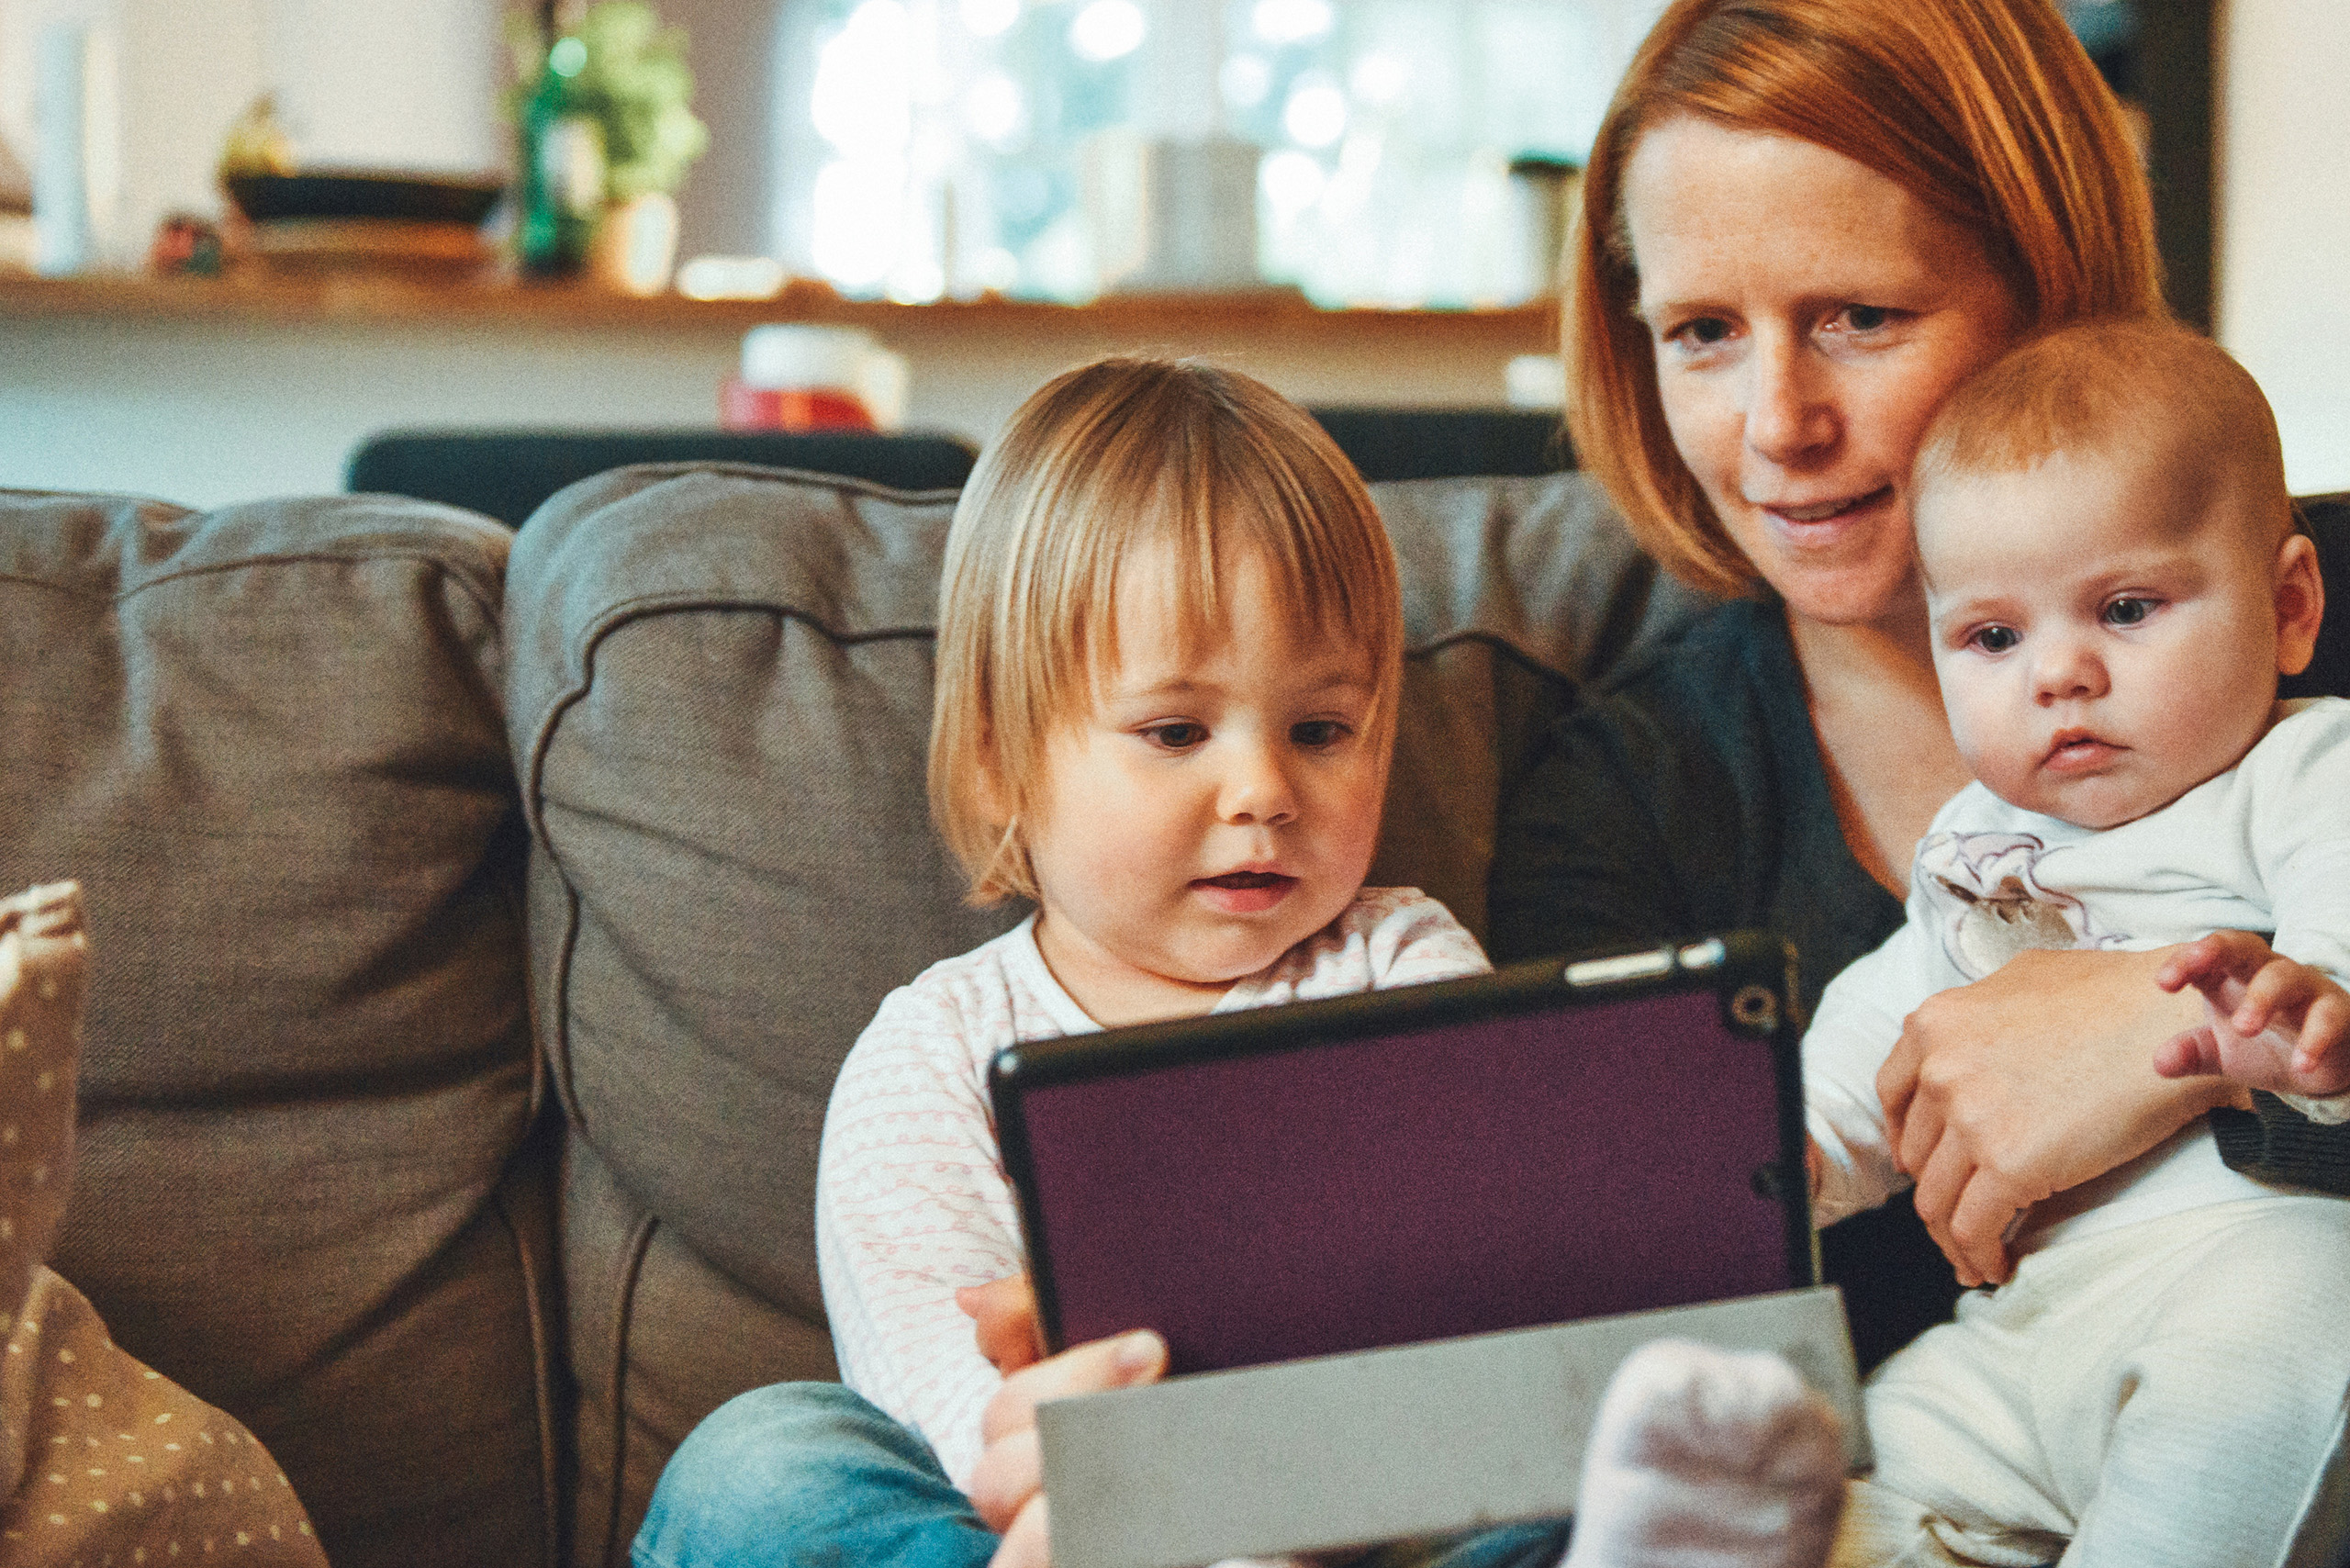 A young woman with two children sat on a sofa looking at insurance policies on an iPad